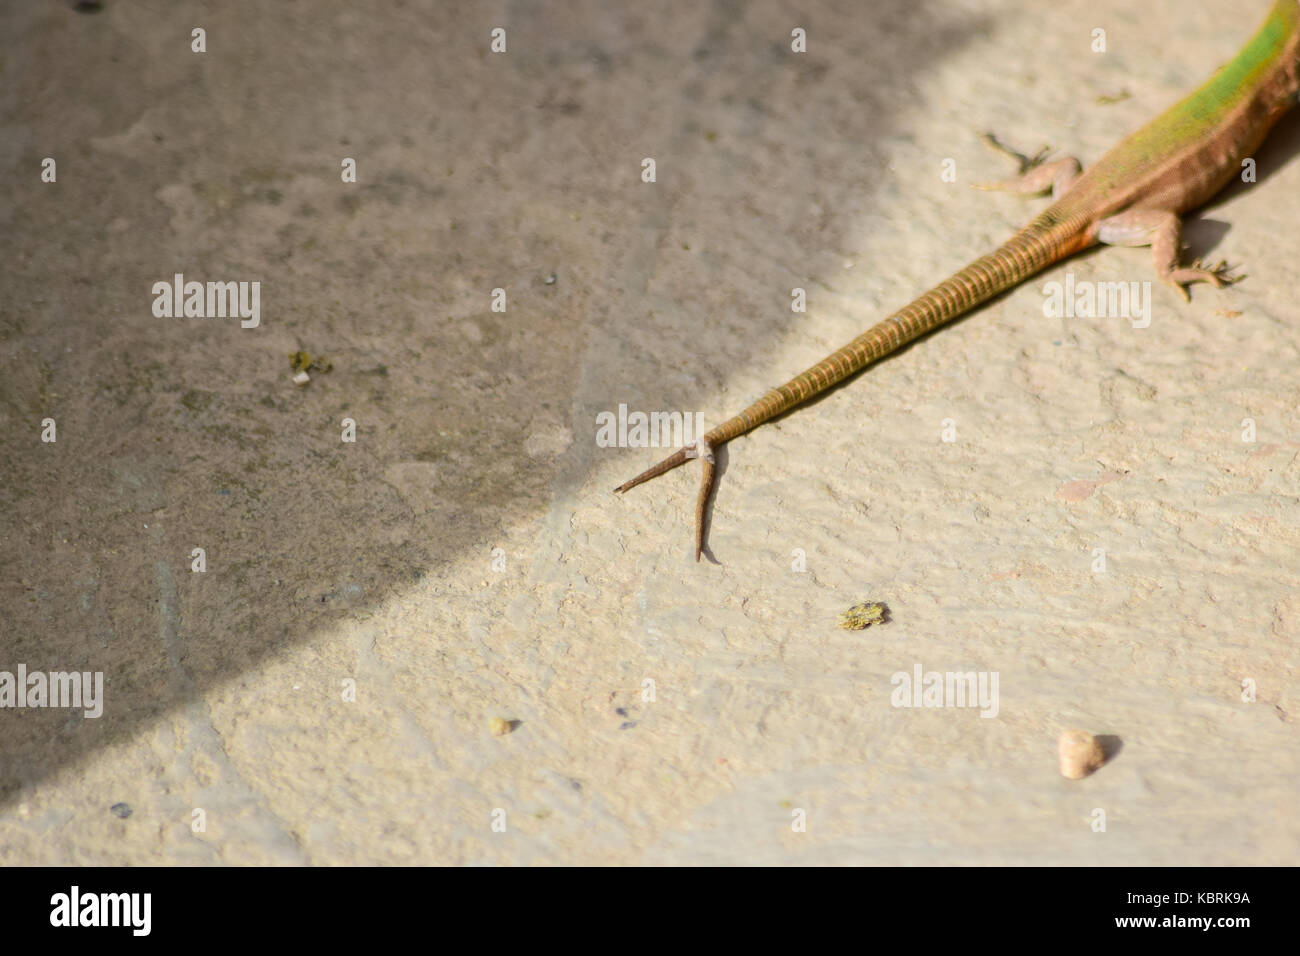 A Maltese Wall Lizard, Podarcis filfolensis, with a forked tail, or two tails, split tail. Old tail damaged and healed, new tail growing out. Malta Stock Photo